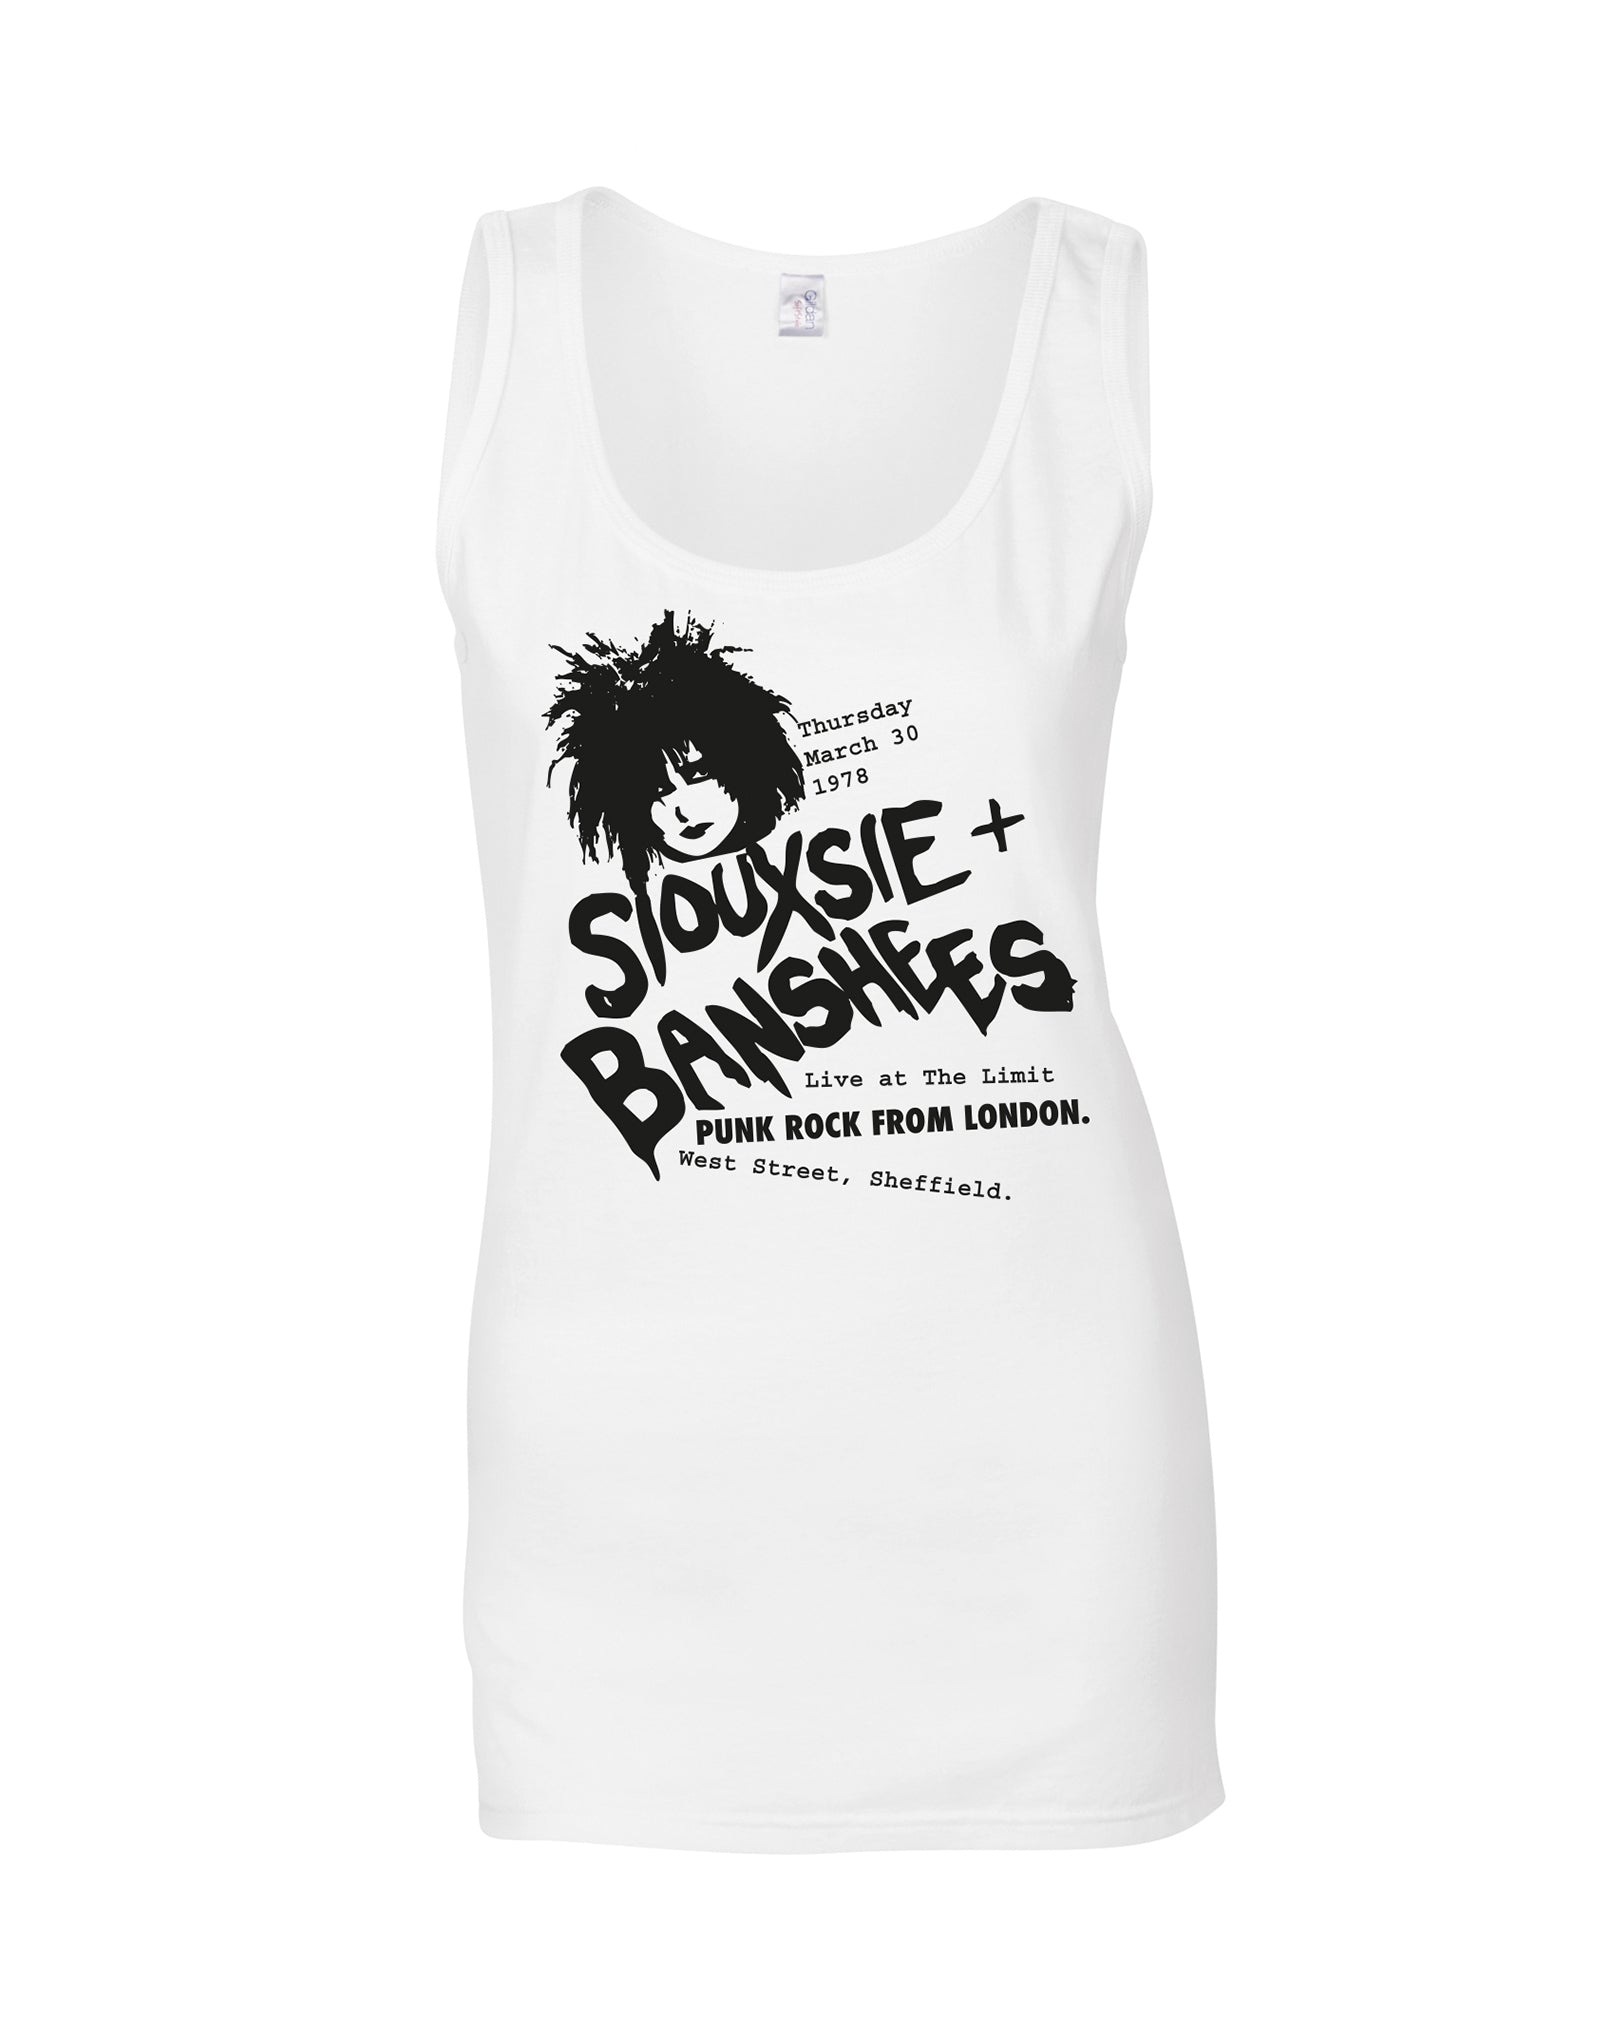 Siouxsie at the Limit ladies fit vest - various colours. - Dirty Stop Outs